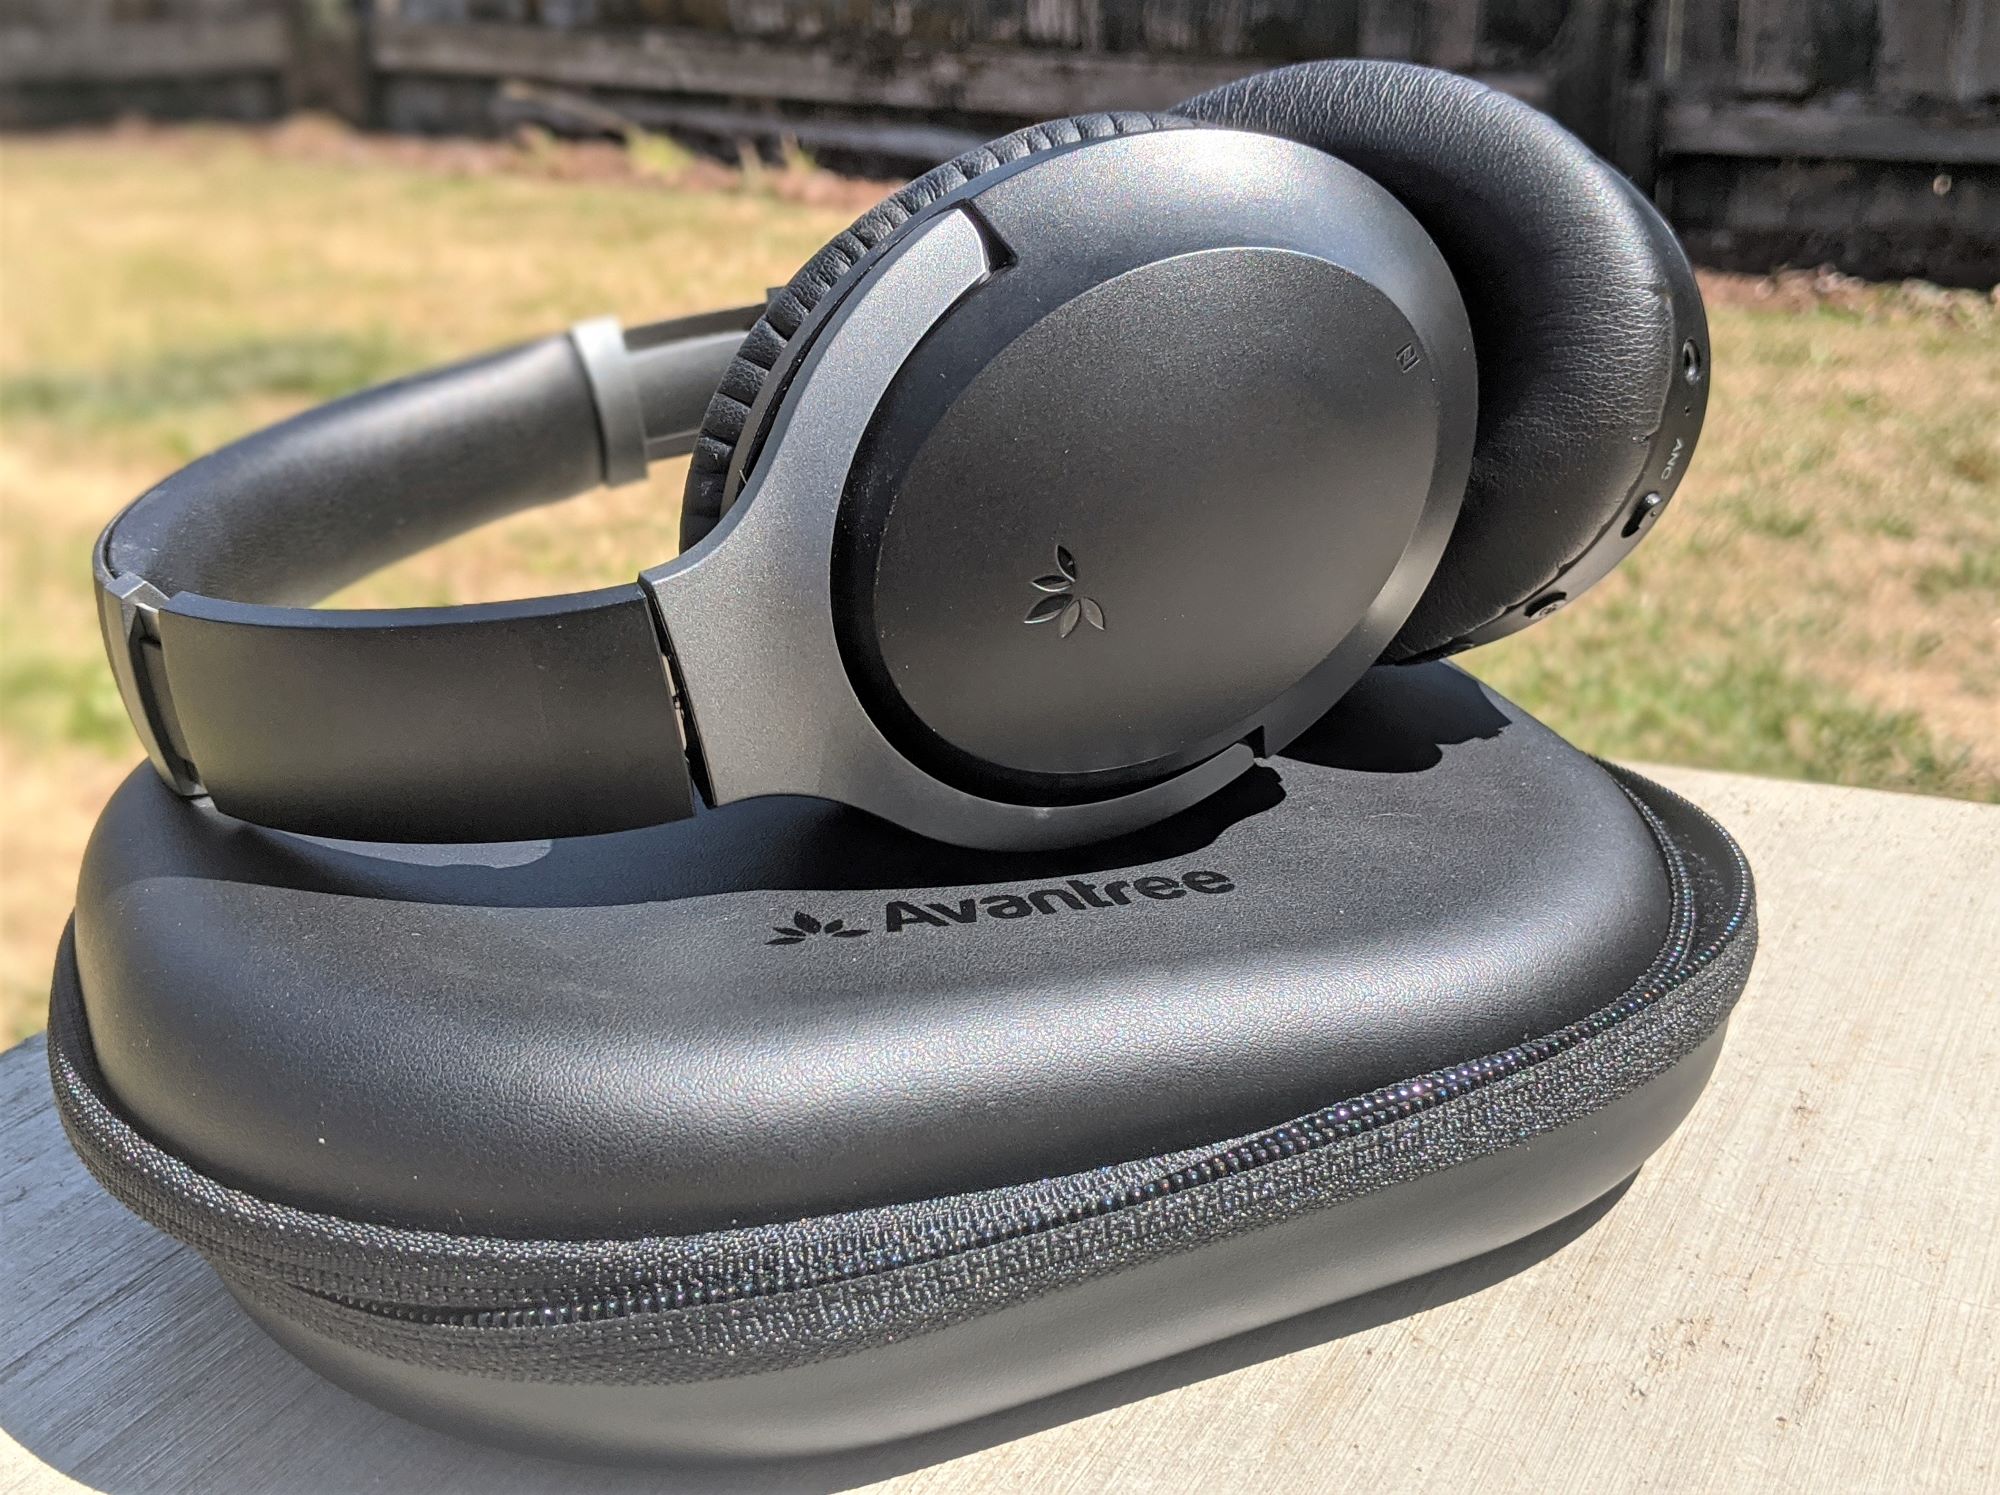 Avantree Aria Pro Review: Functional, Affordable Headphones